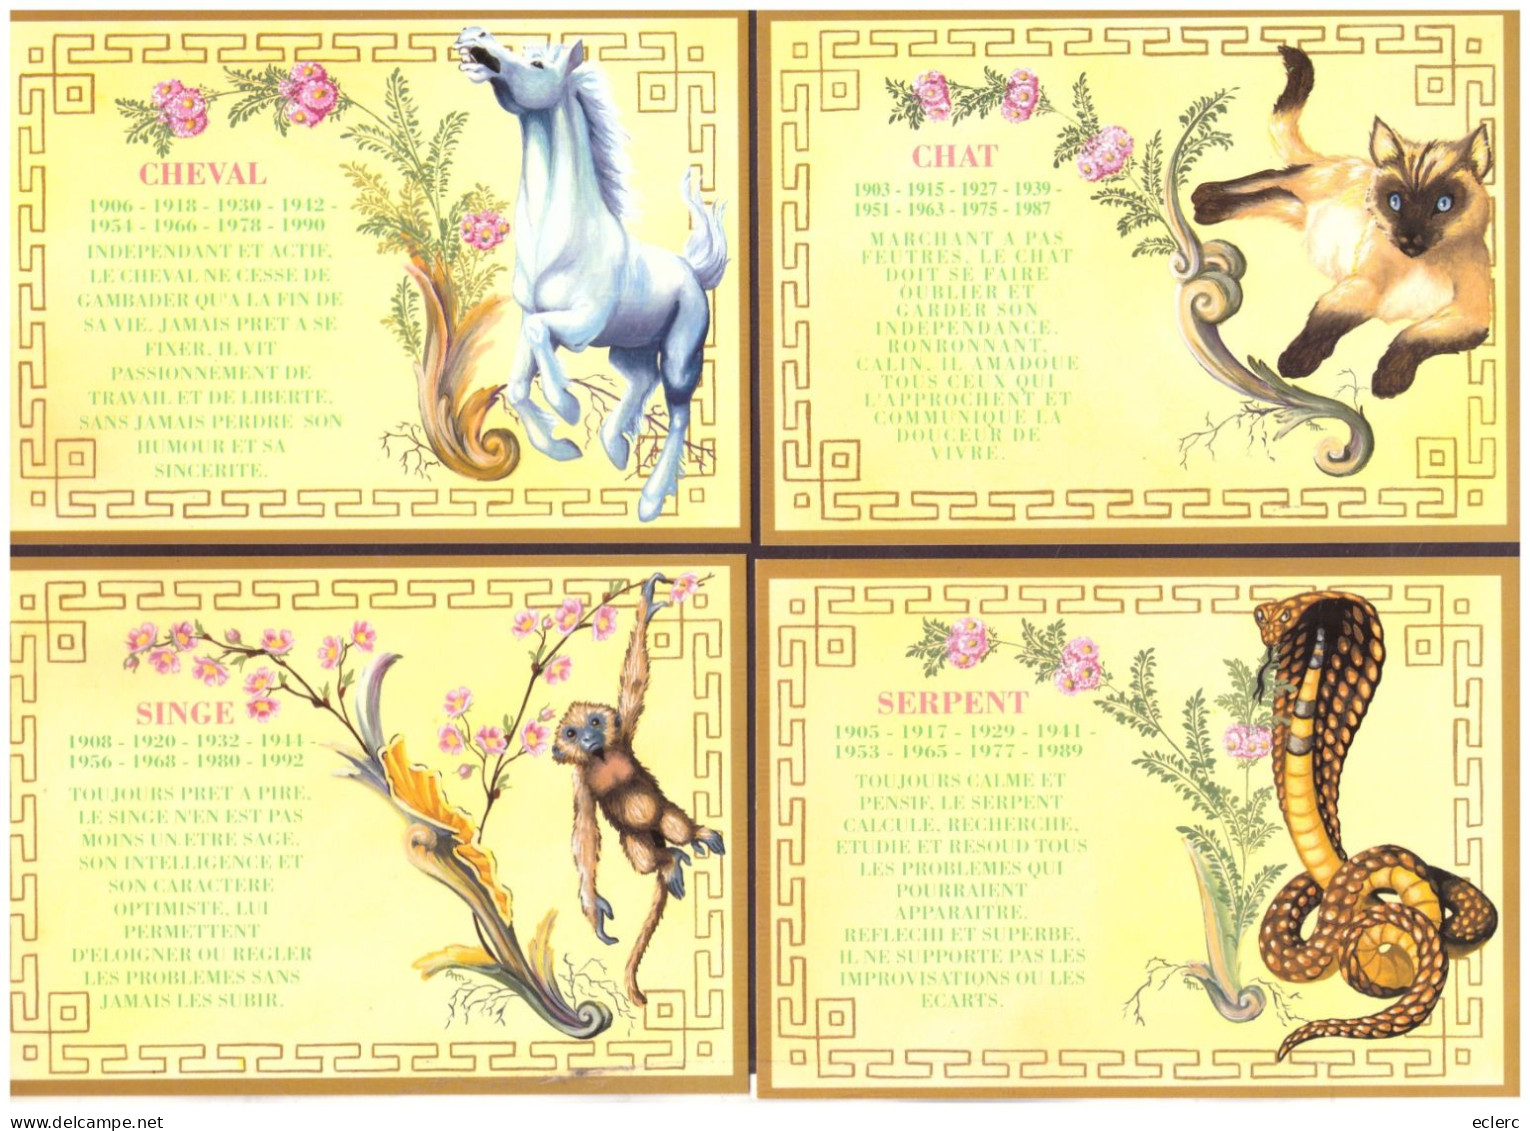 ASTROLOGIE CHINOISE - 12 CARTES 10x15cm - TB - Astrologie